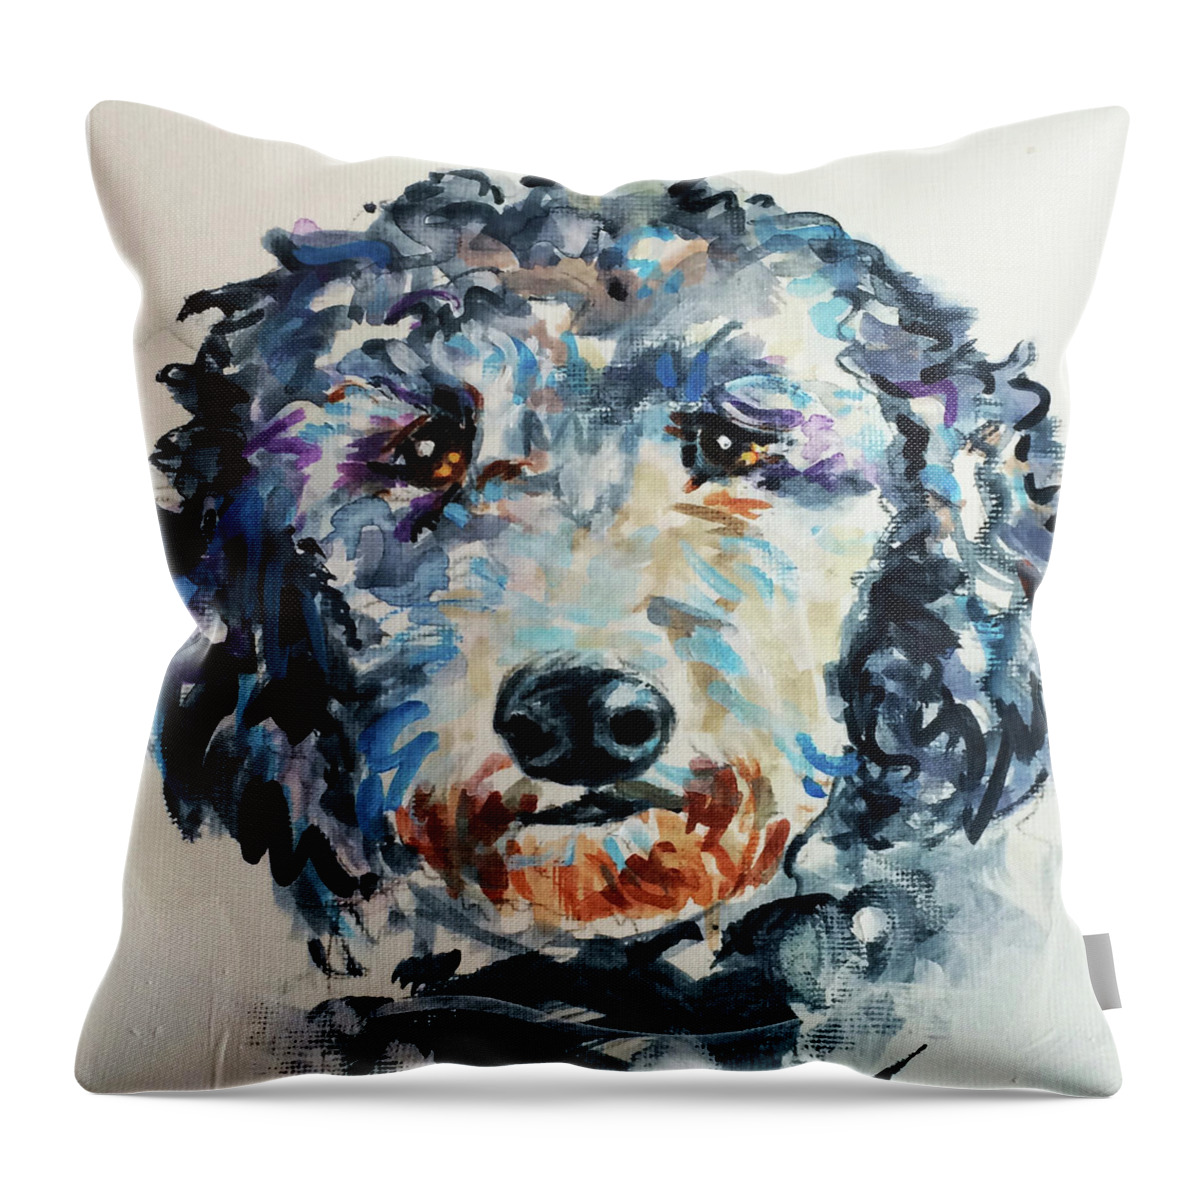  Throw Pillow featuring the painting Toots by Judy Rogan